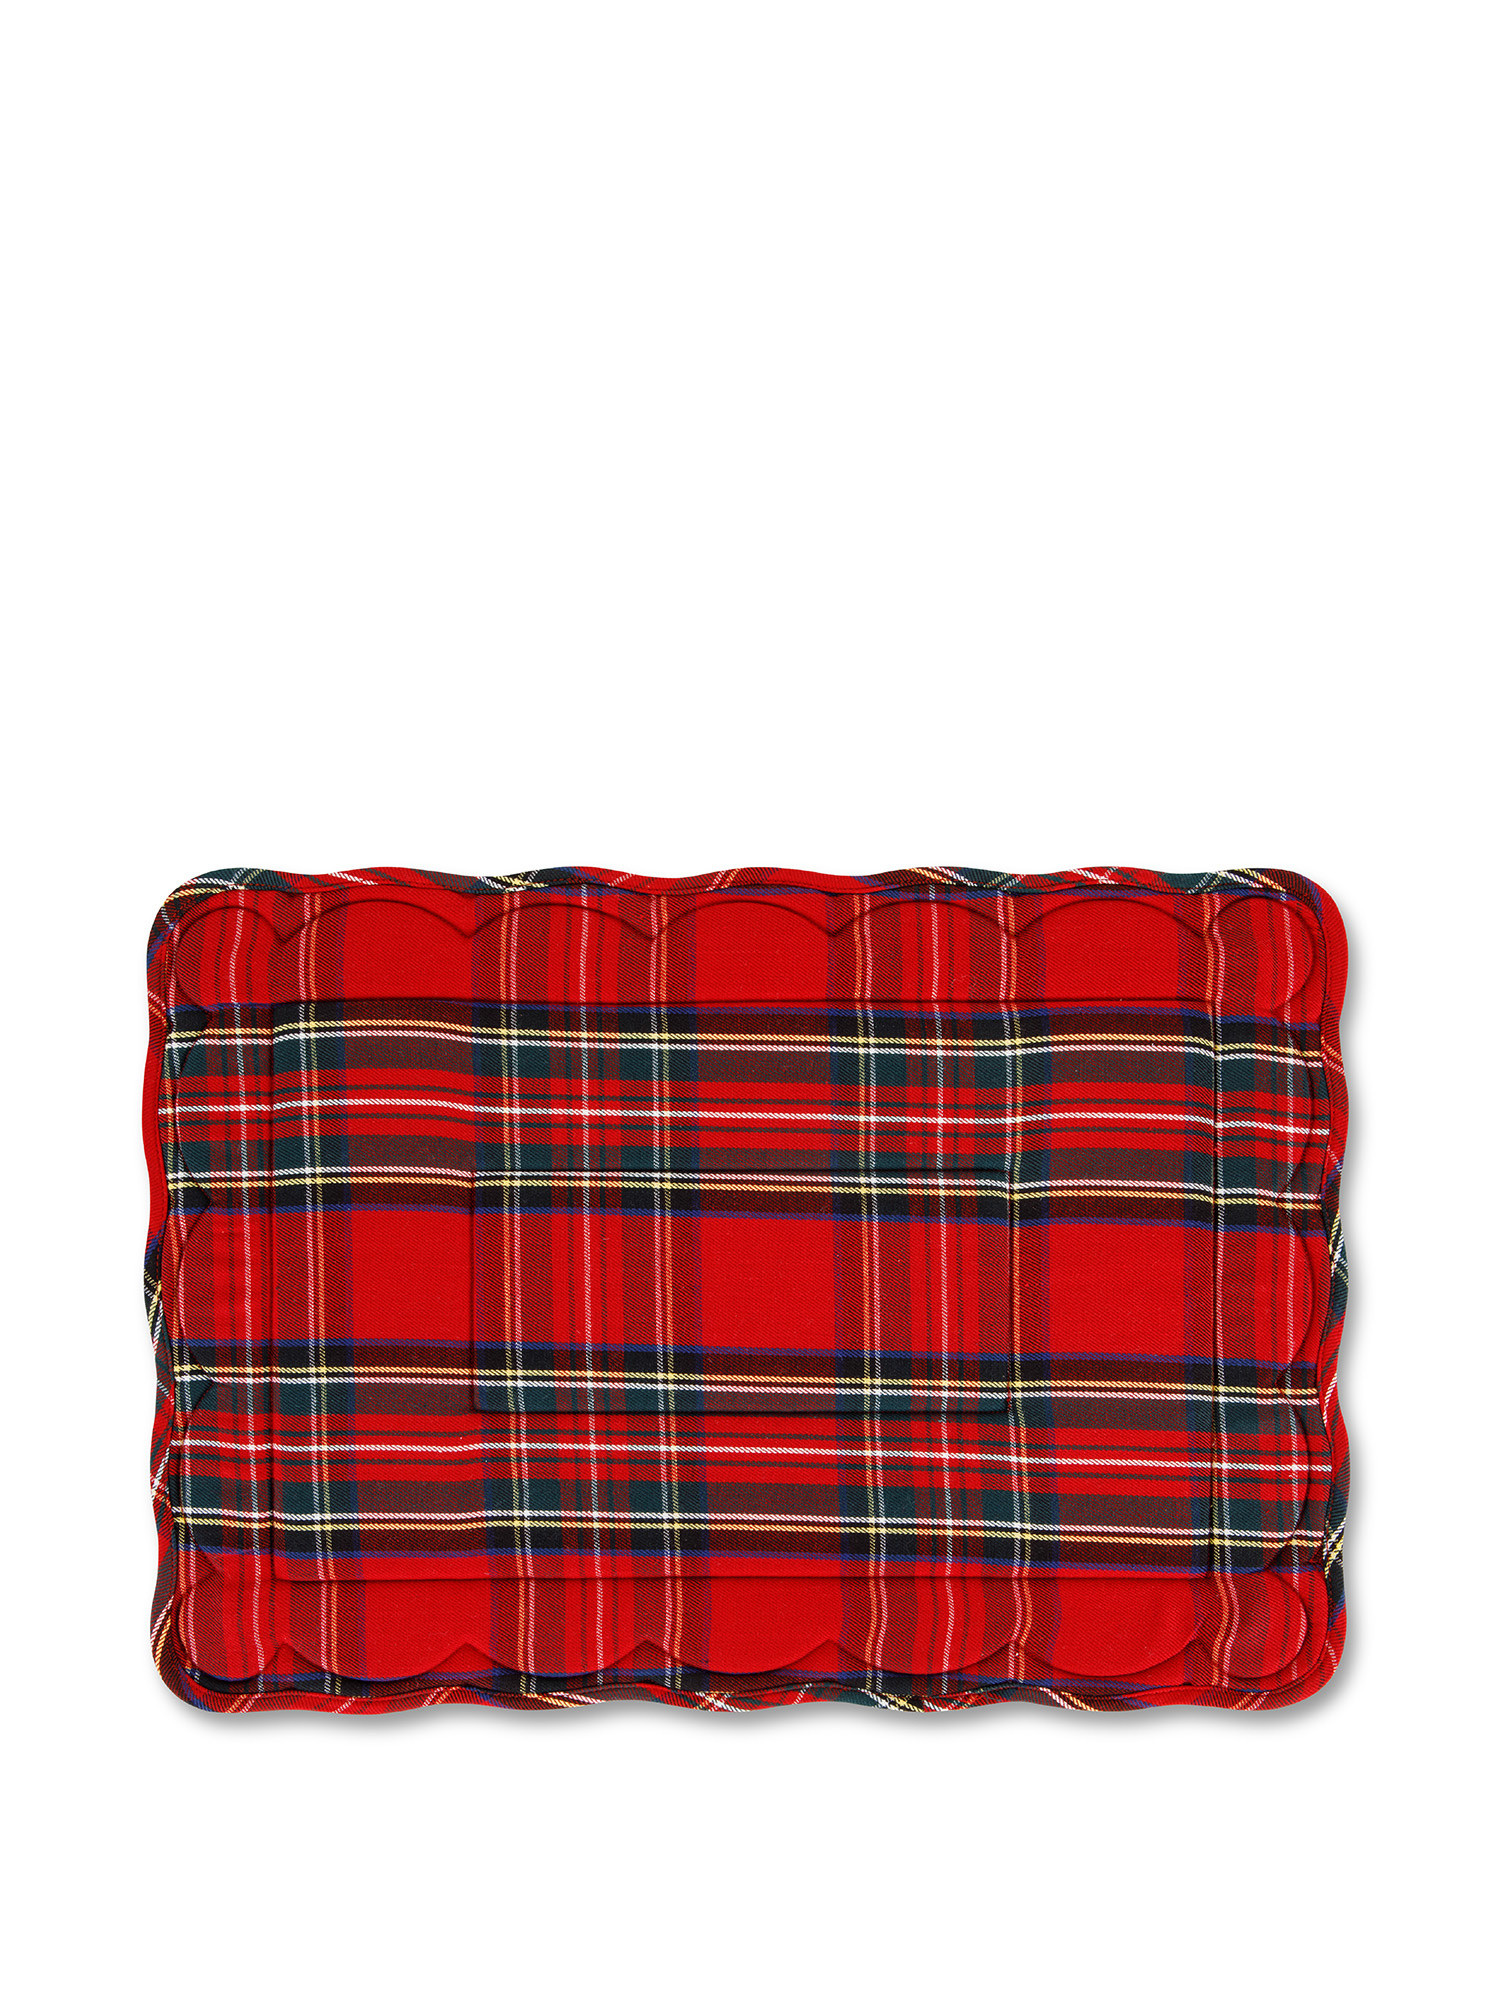 Tartan cotton twill placemat, Red, large image number 0